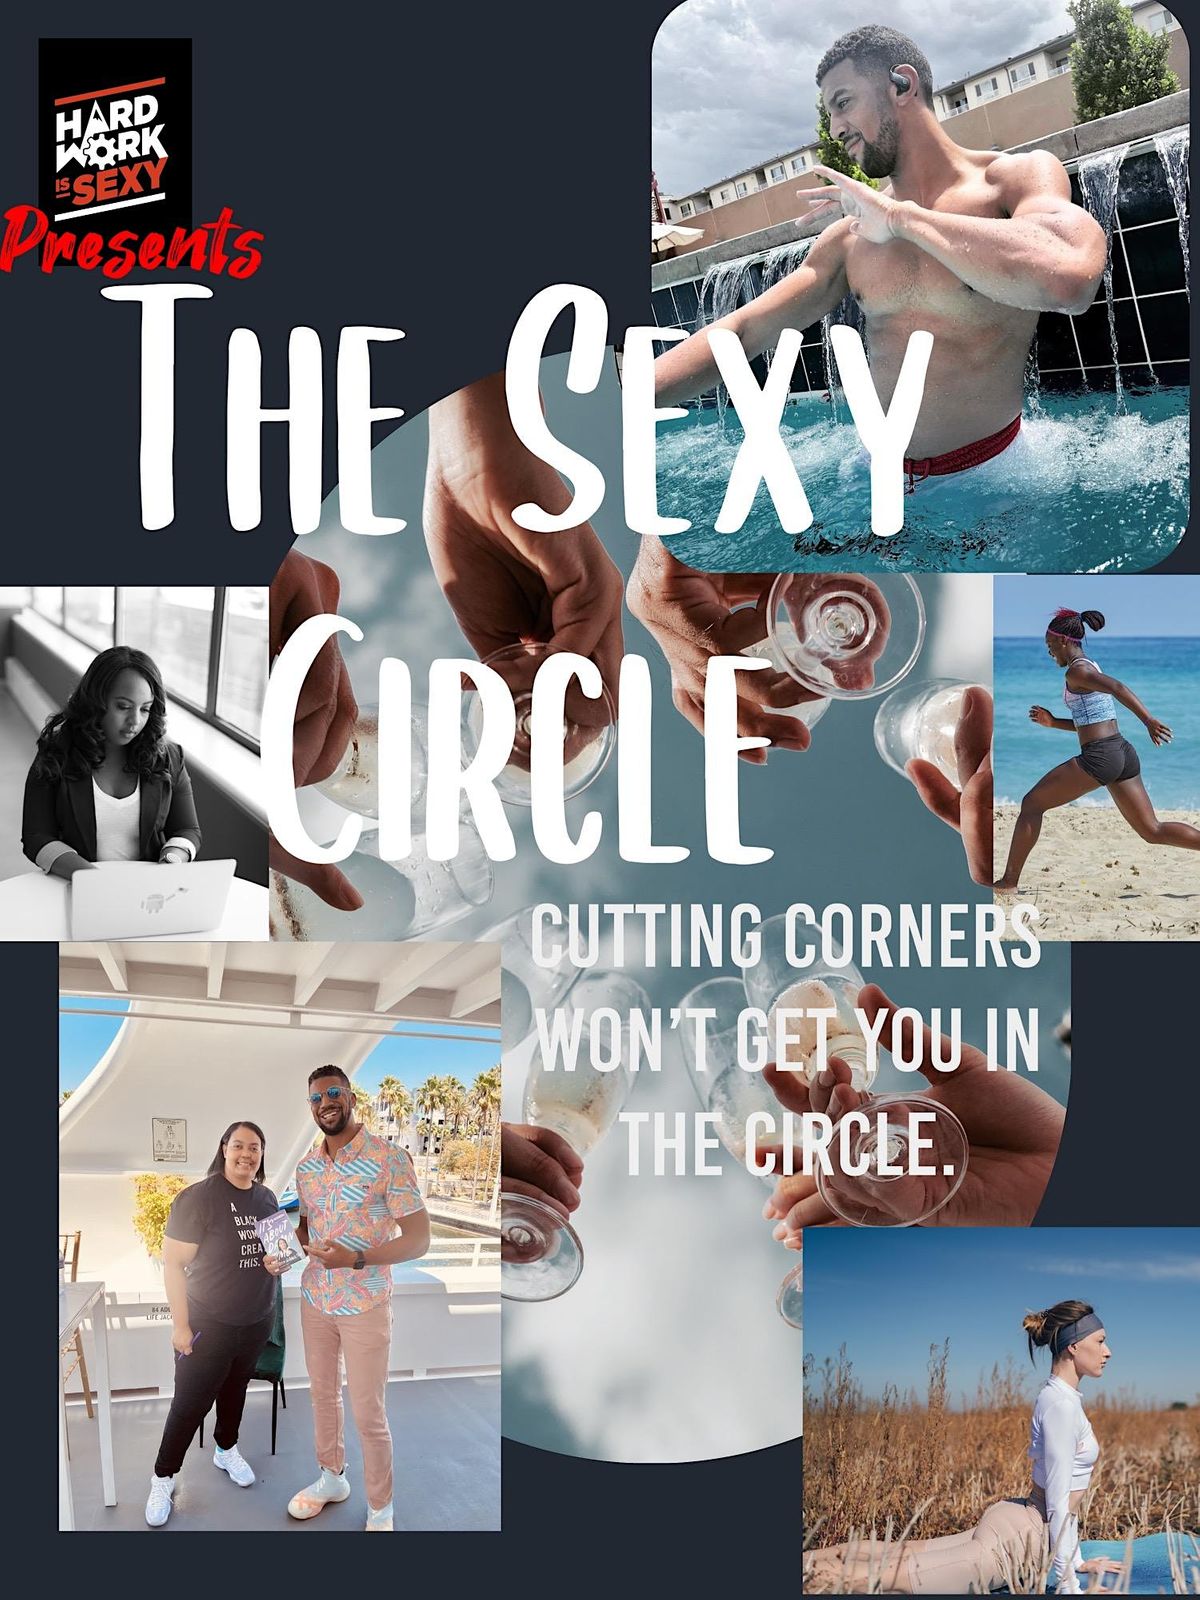 Professional Women, Boss Babes & "SHE"-eo's: Join the Sexy Circle-Memphis